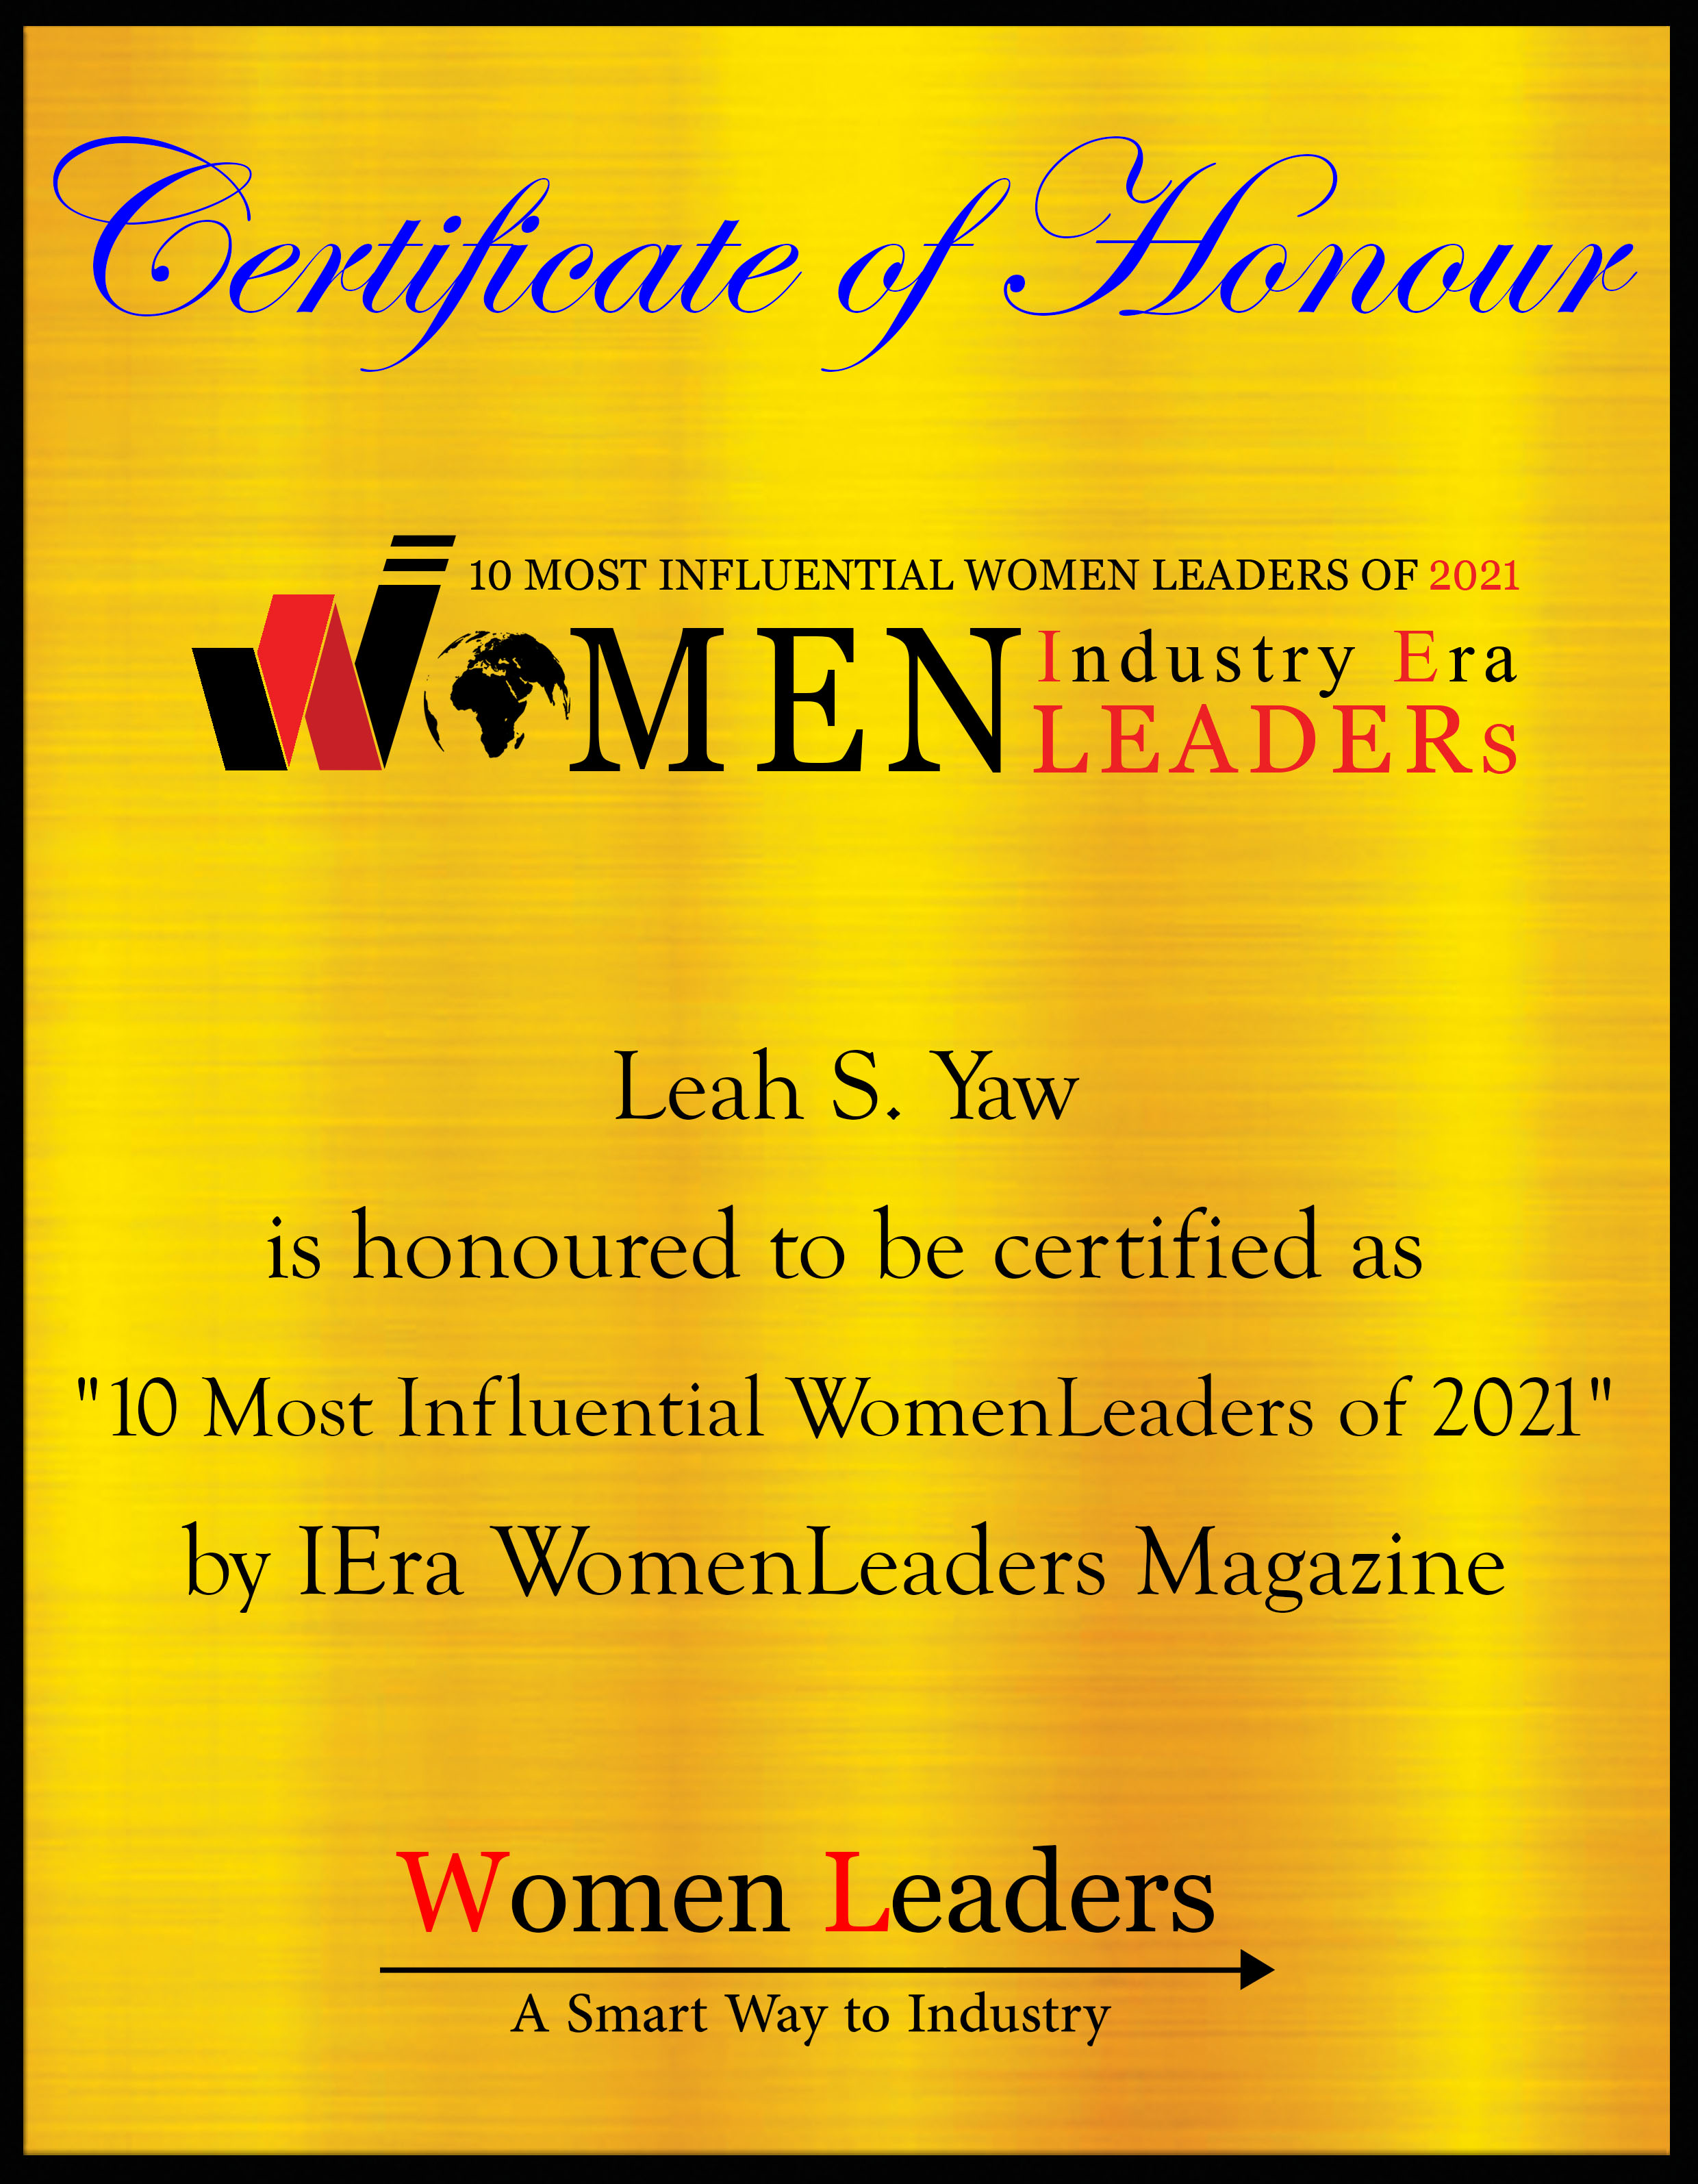 Leah S. Yaw, senior VP and CSO at Devereux, Most Influential WomenLeaders of 2021